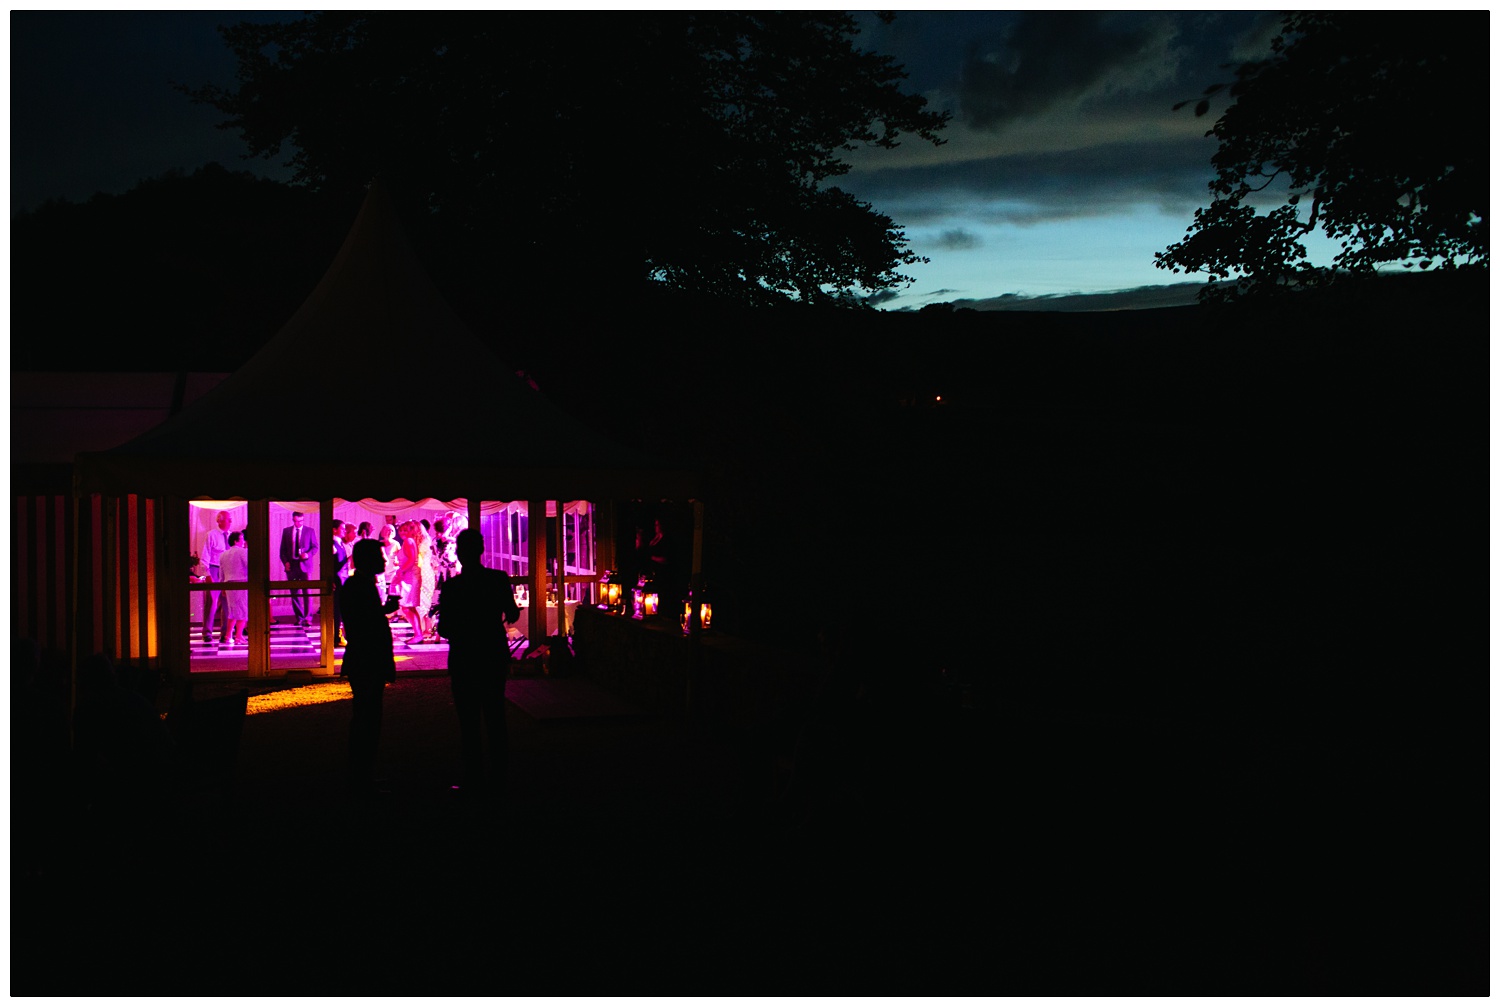 The view of the marquee at the Inn at Whitewell at twilight. The marquee is lit up magenta.